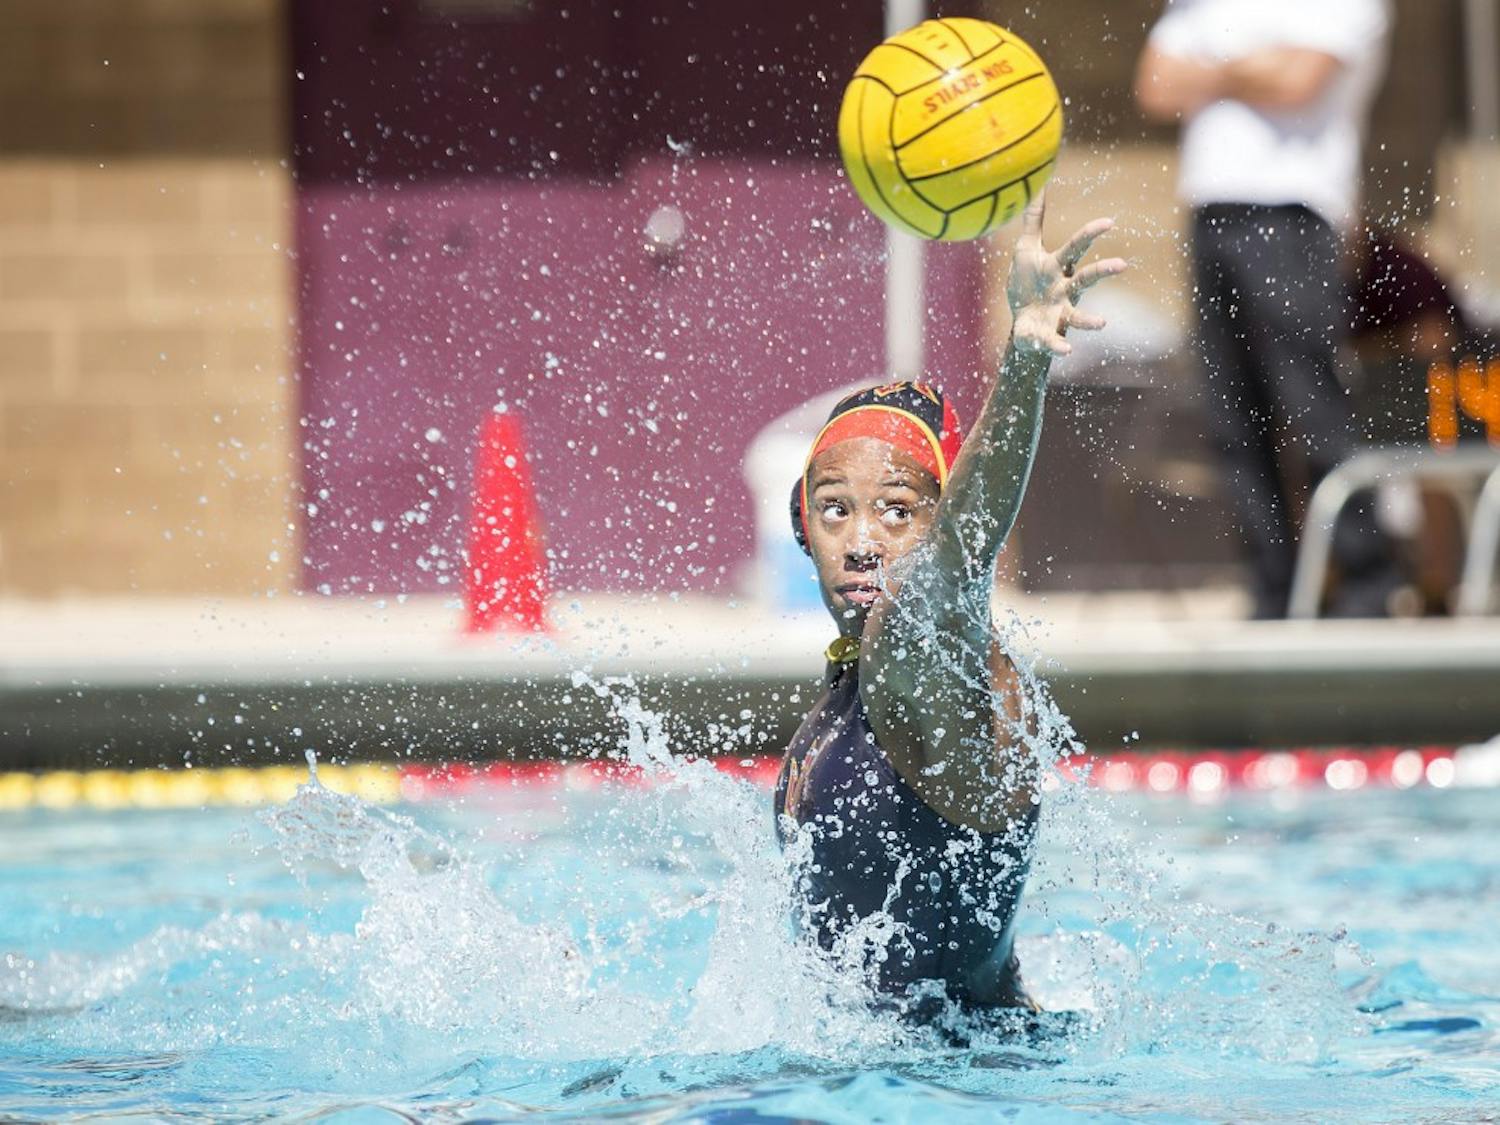 ASU goalie Mia Rycraw reaches out to block a shot on goal during a game against the Cal State Bears at Mona Plummer Aquatic Center in Tempe, Arizona, on Saturday, April 2, 2016. The Sun Devils won the match, 7-6, in sudden-death overtime. 